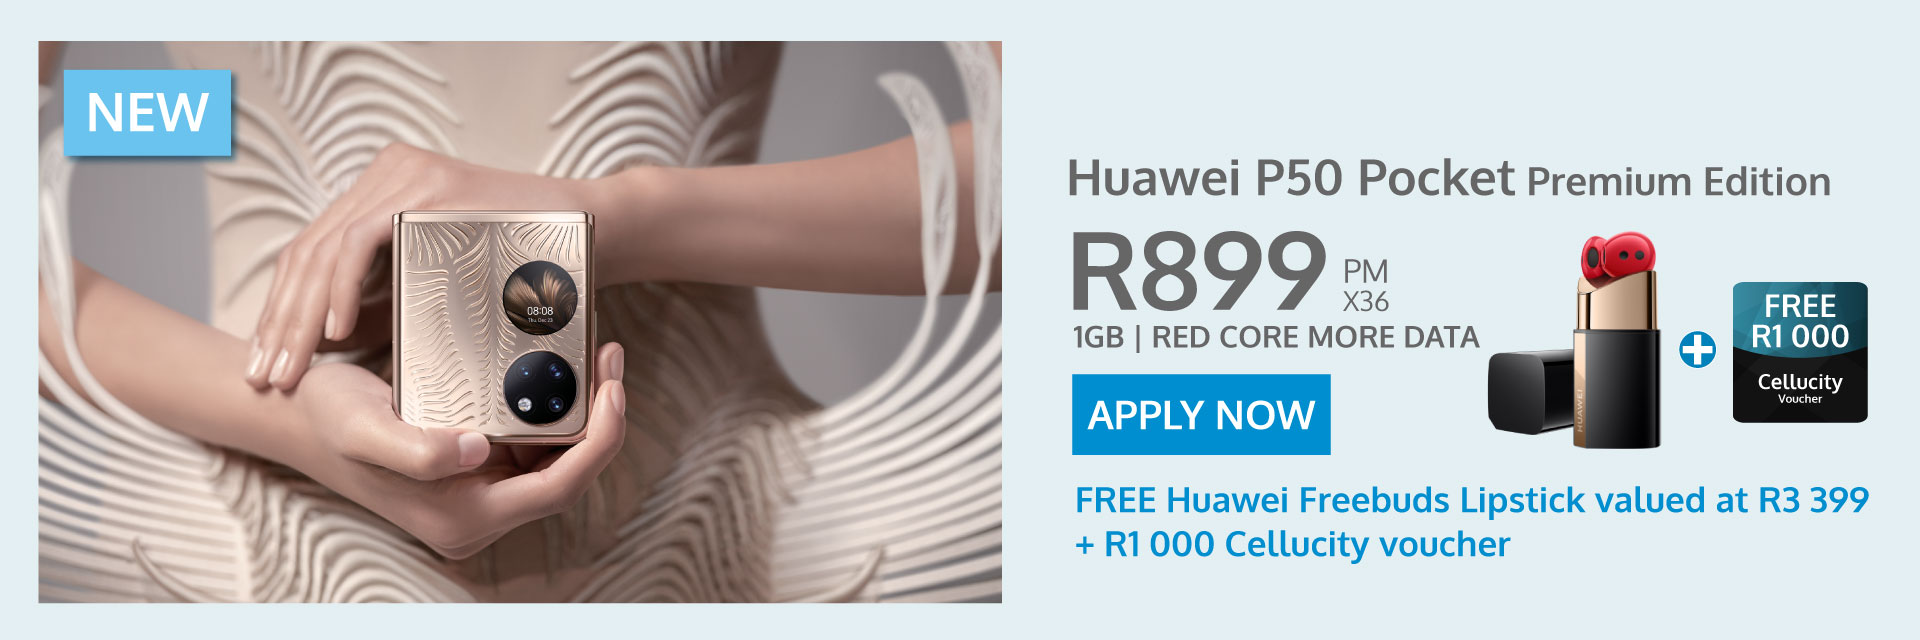 huawei p50 pocket contract deal banner